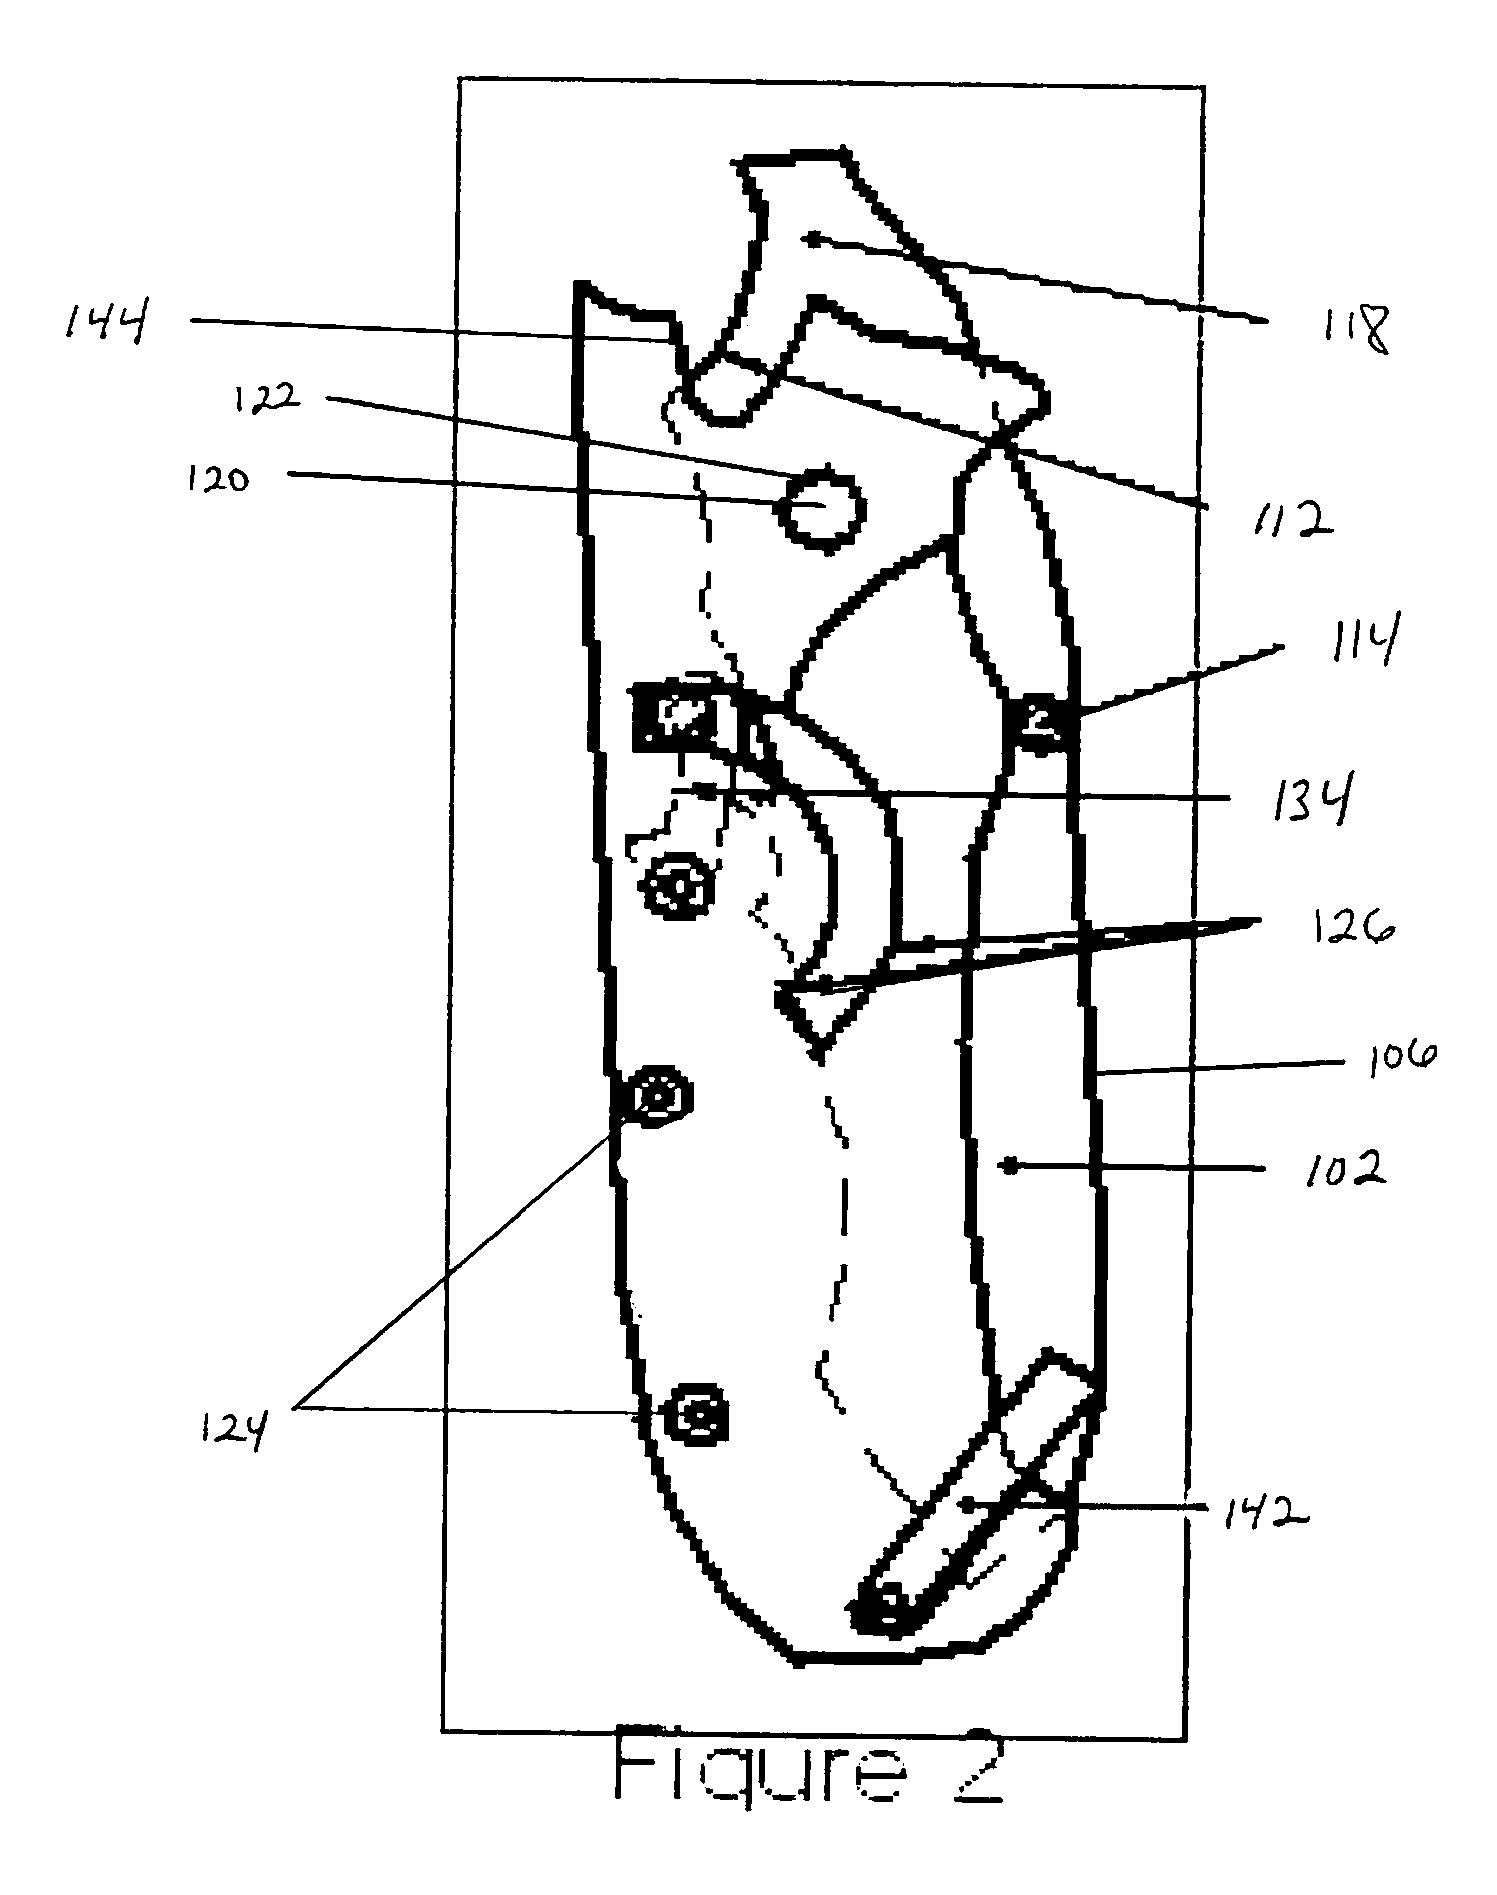 Folding knife having locking portion, clip portion and unsharpened protrusion